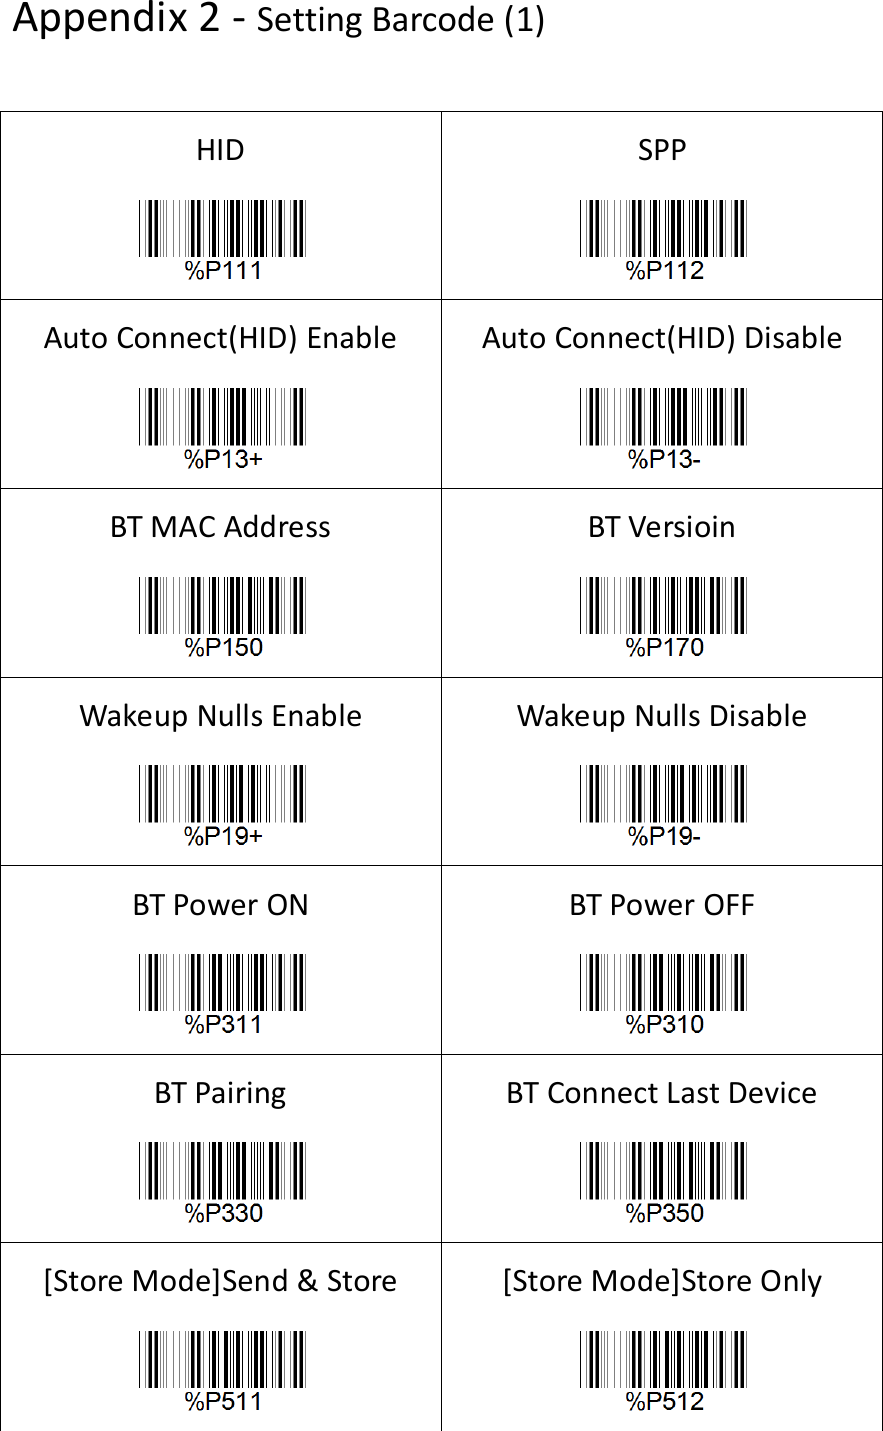 Appendix 2 - Setting Barcode (1) HID  SPP  Auto Connect(HID) Enable  Auto Connect(HID) Disable  BT MAC Address  BT Versioin  Wakeup Nulls Enable  Wakeup Nulls Disable  BT Power ON  BT Power OFF  BT Pairing  BT Connect Last Device  [Store Mode]Send &amp; Store  [Store Mode]Store Only  